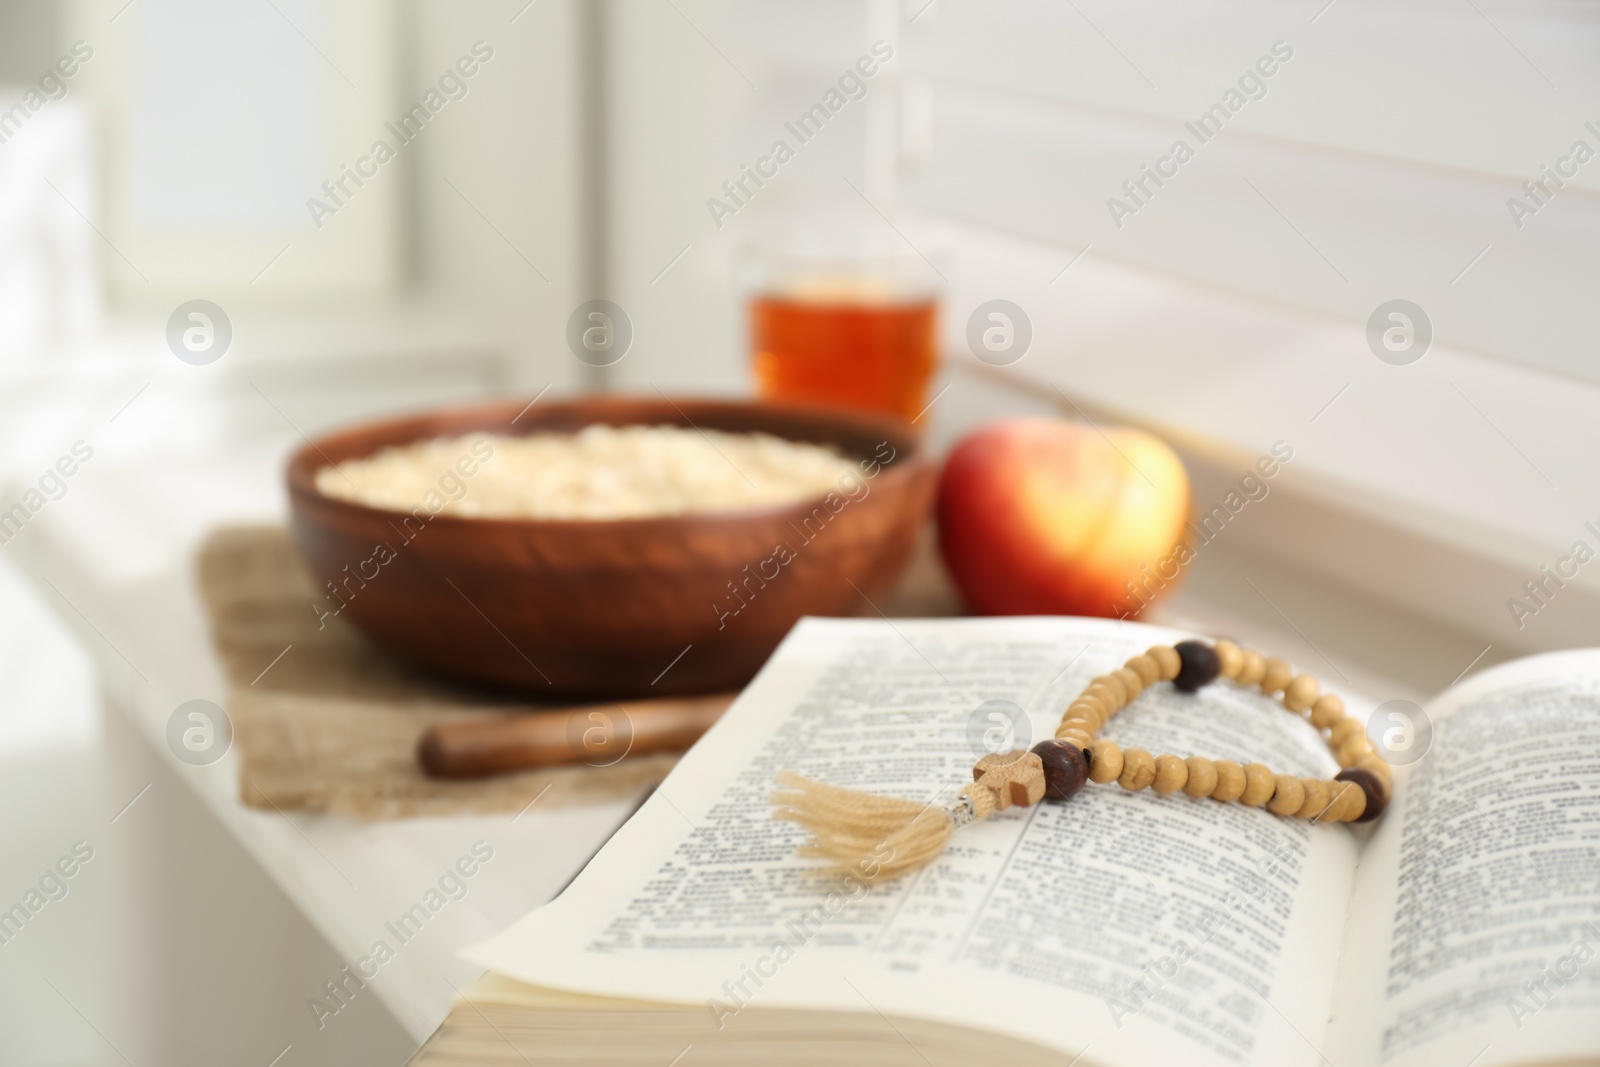 Photo of Holy Bible with prayer beads on window sill indoors, closeup. Great Lent season